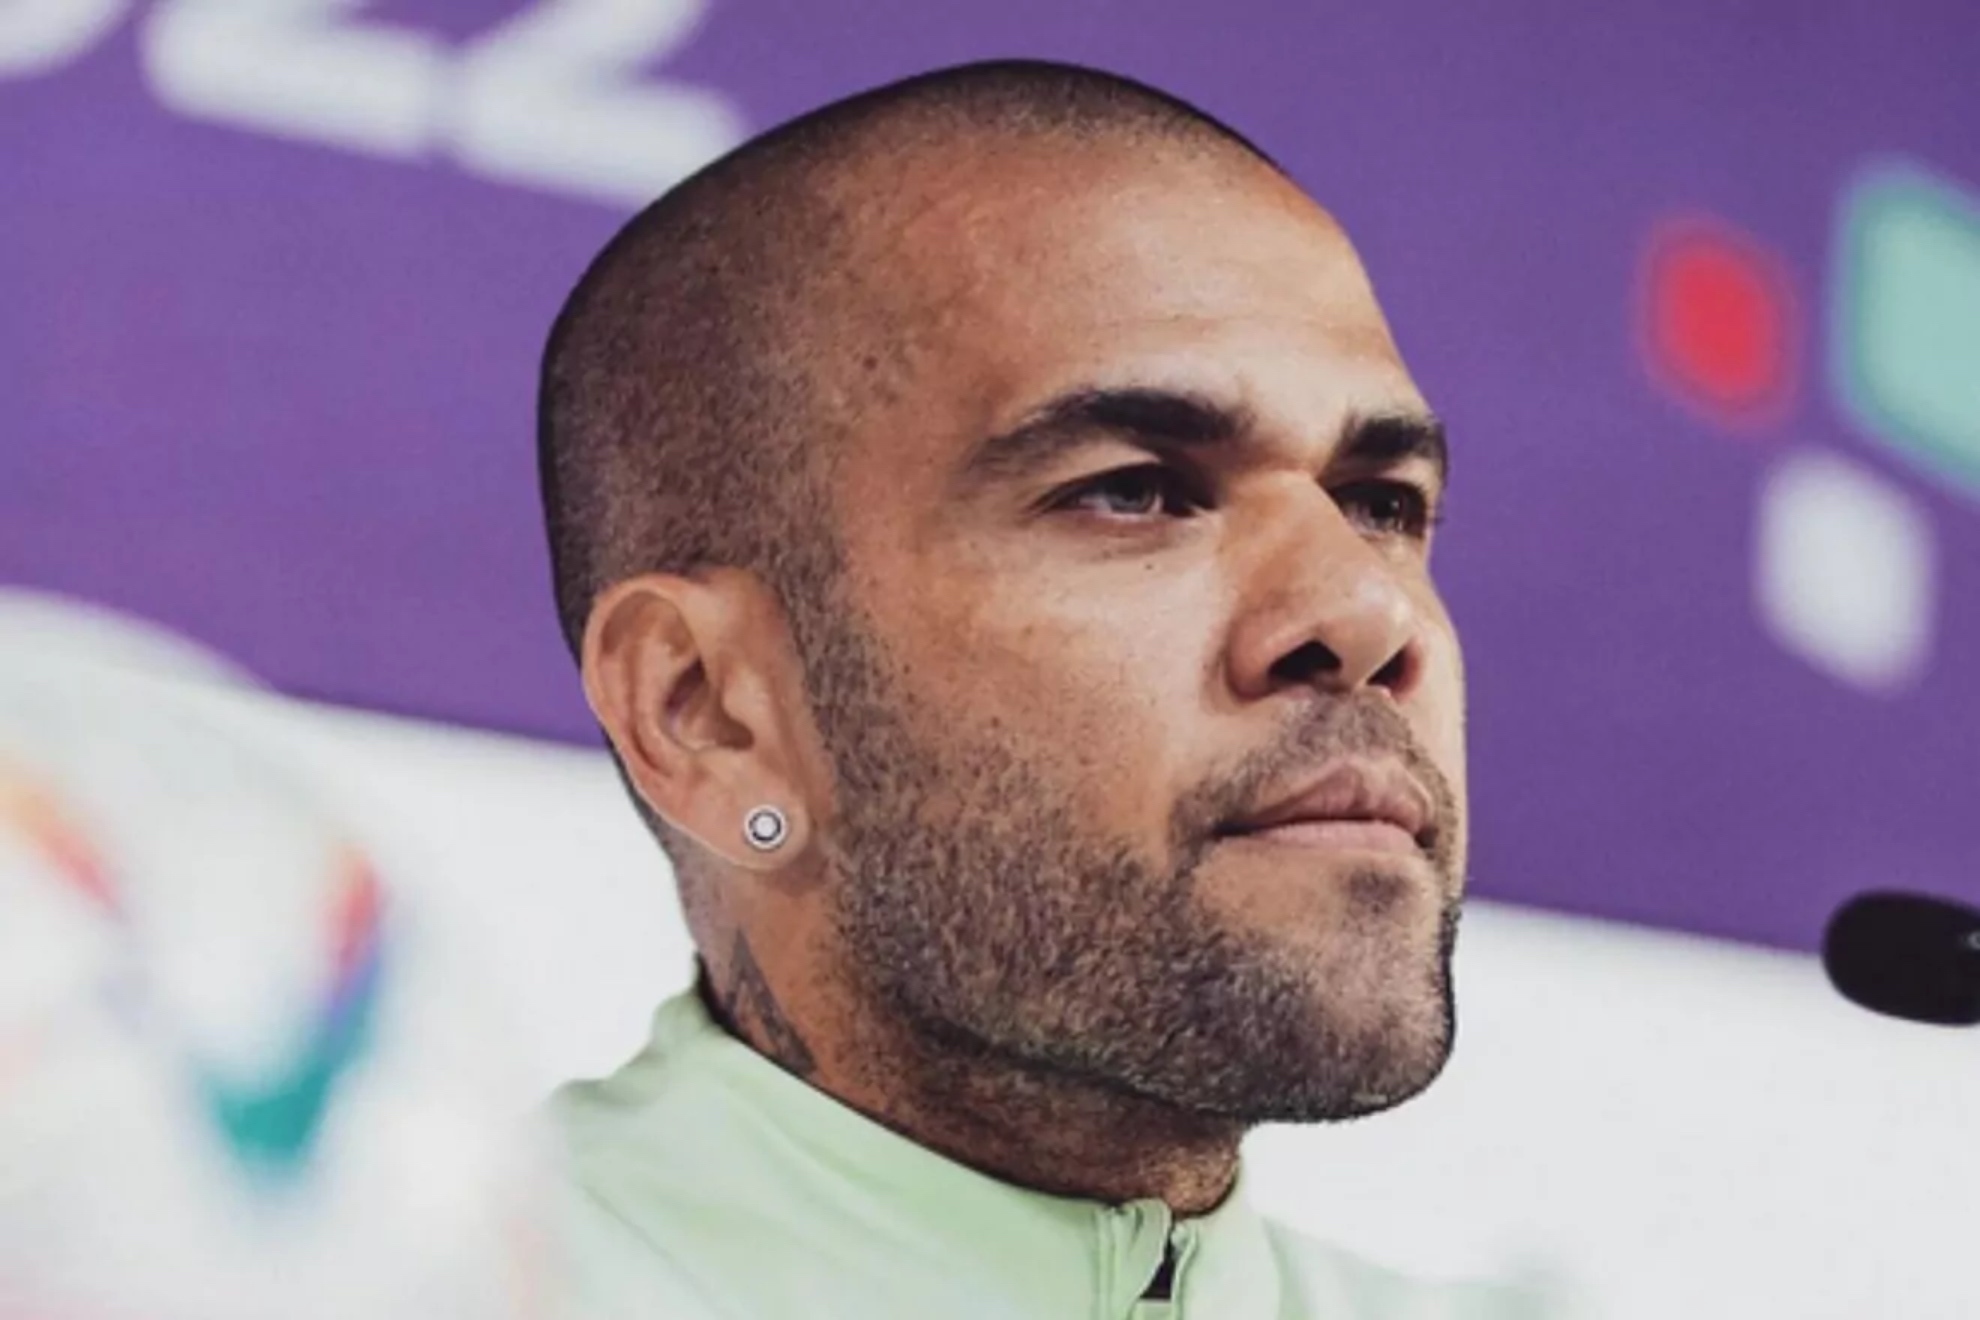 Dani Alves after appeal for release was rejected: Relations were consensual